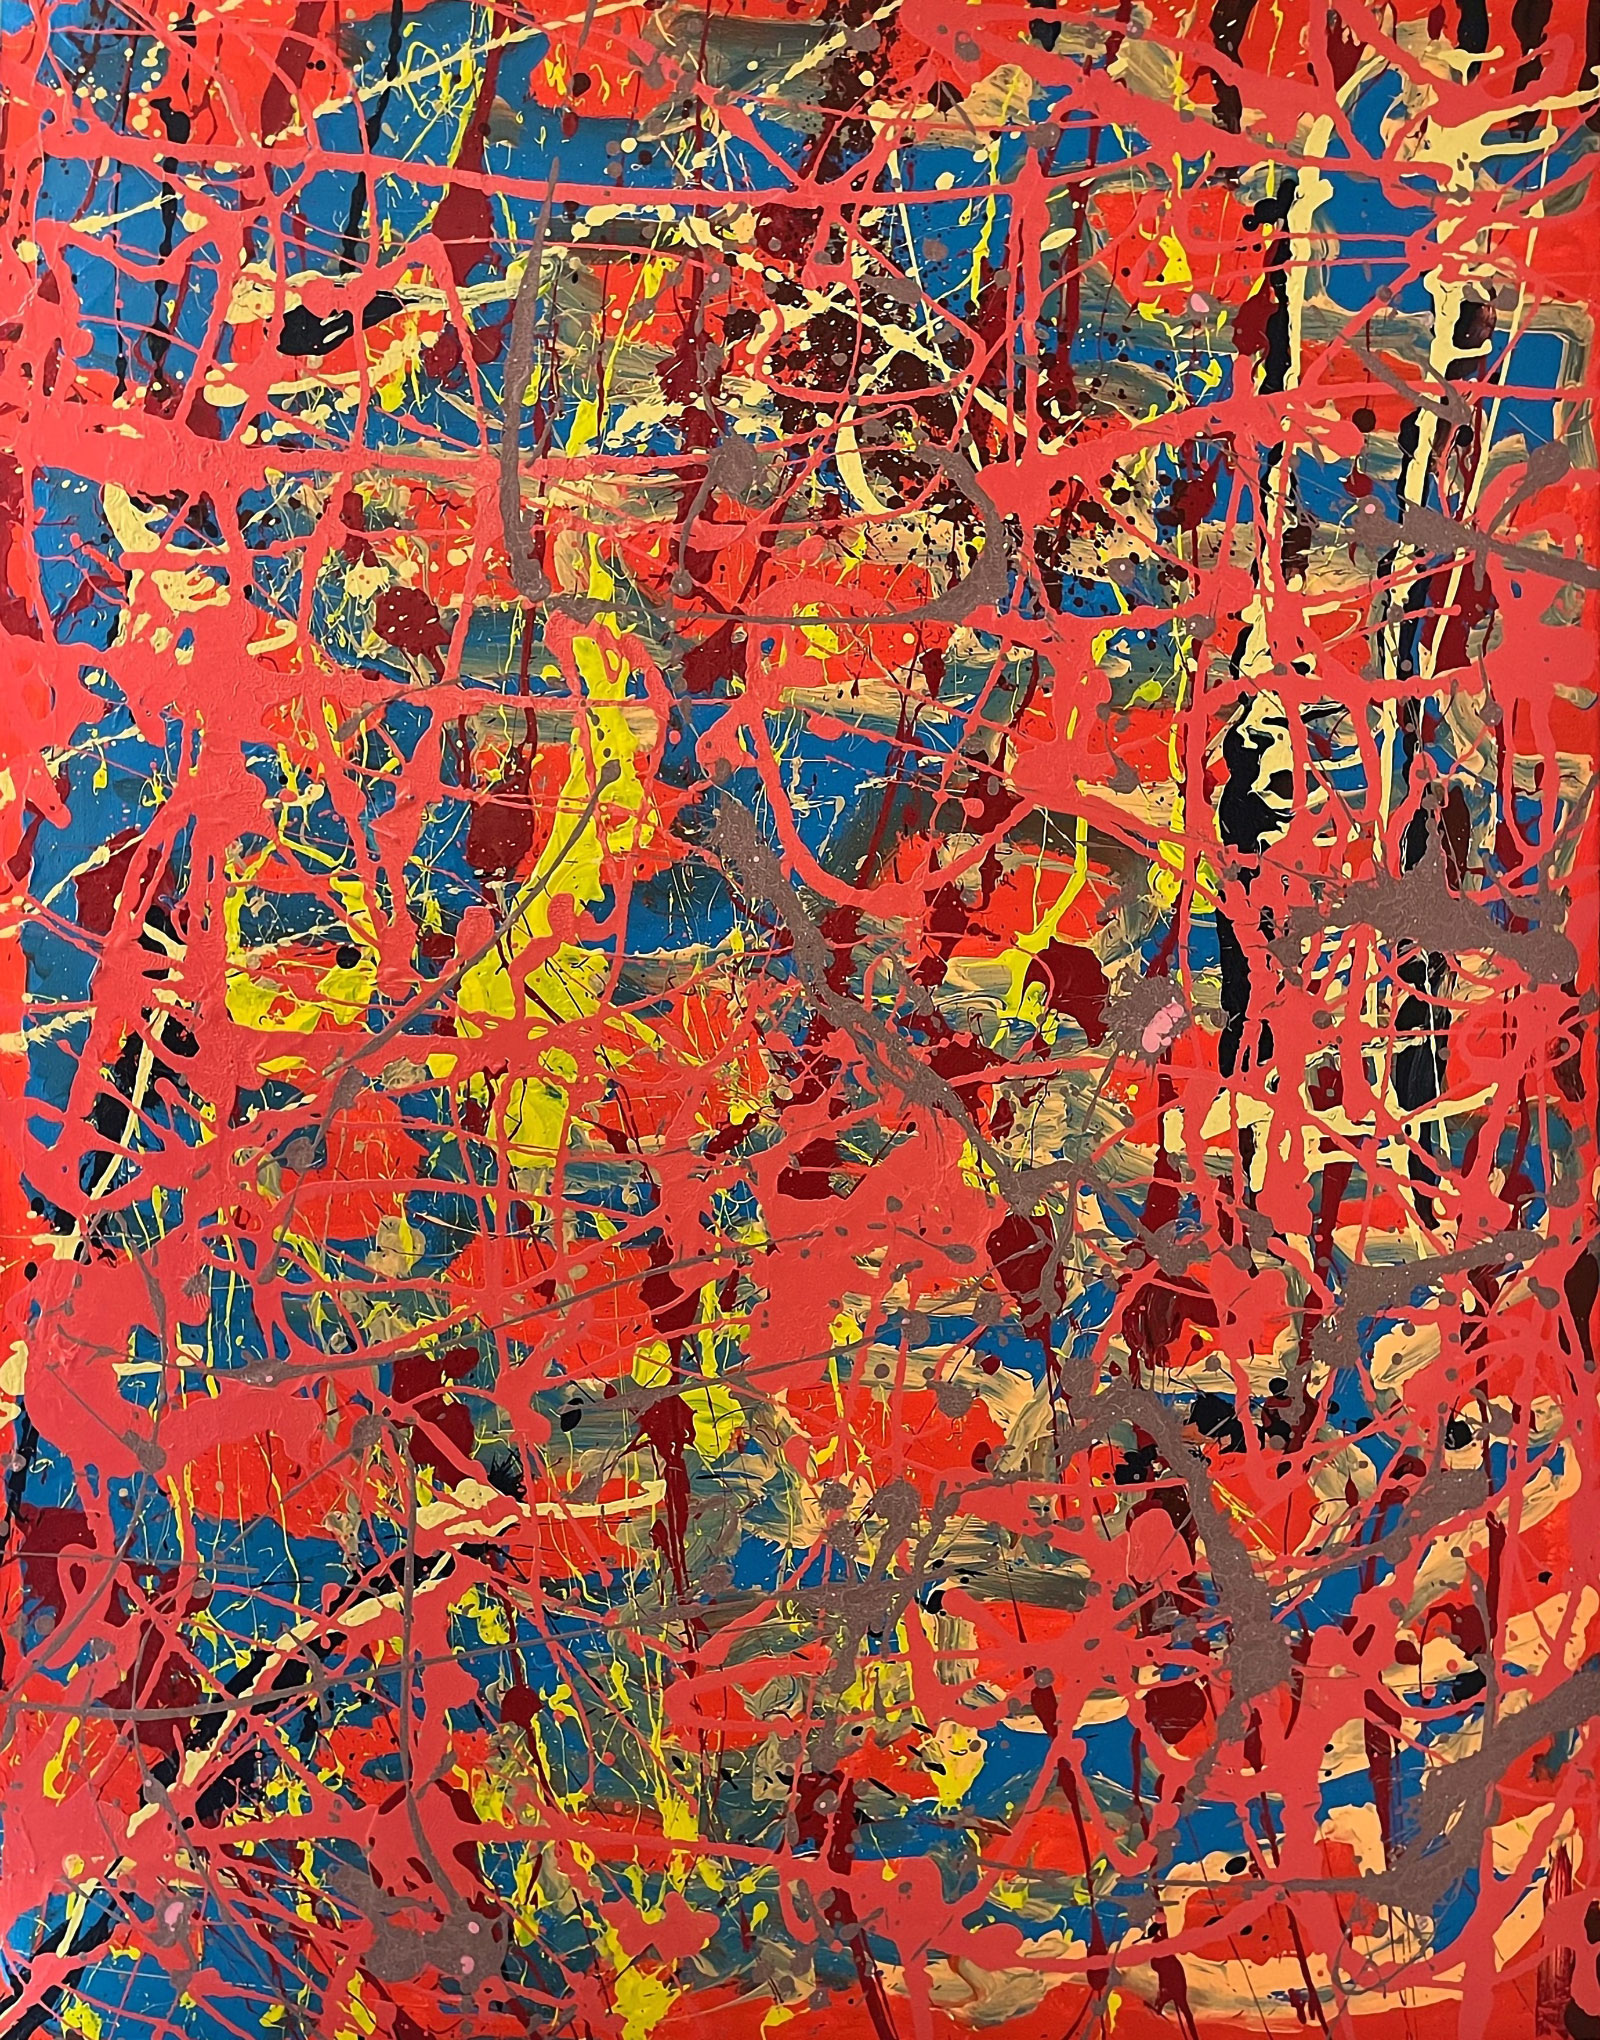 Edward Dwurnik - Abstract painting No 215-3218 (Oil on Canvas | Size: 114 x 146 cm | Price: 110000 PLN)